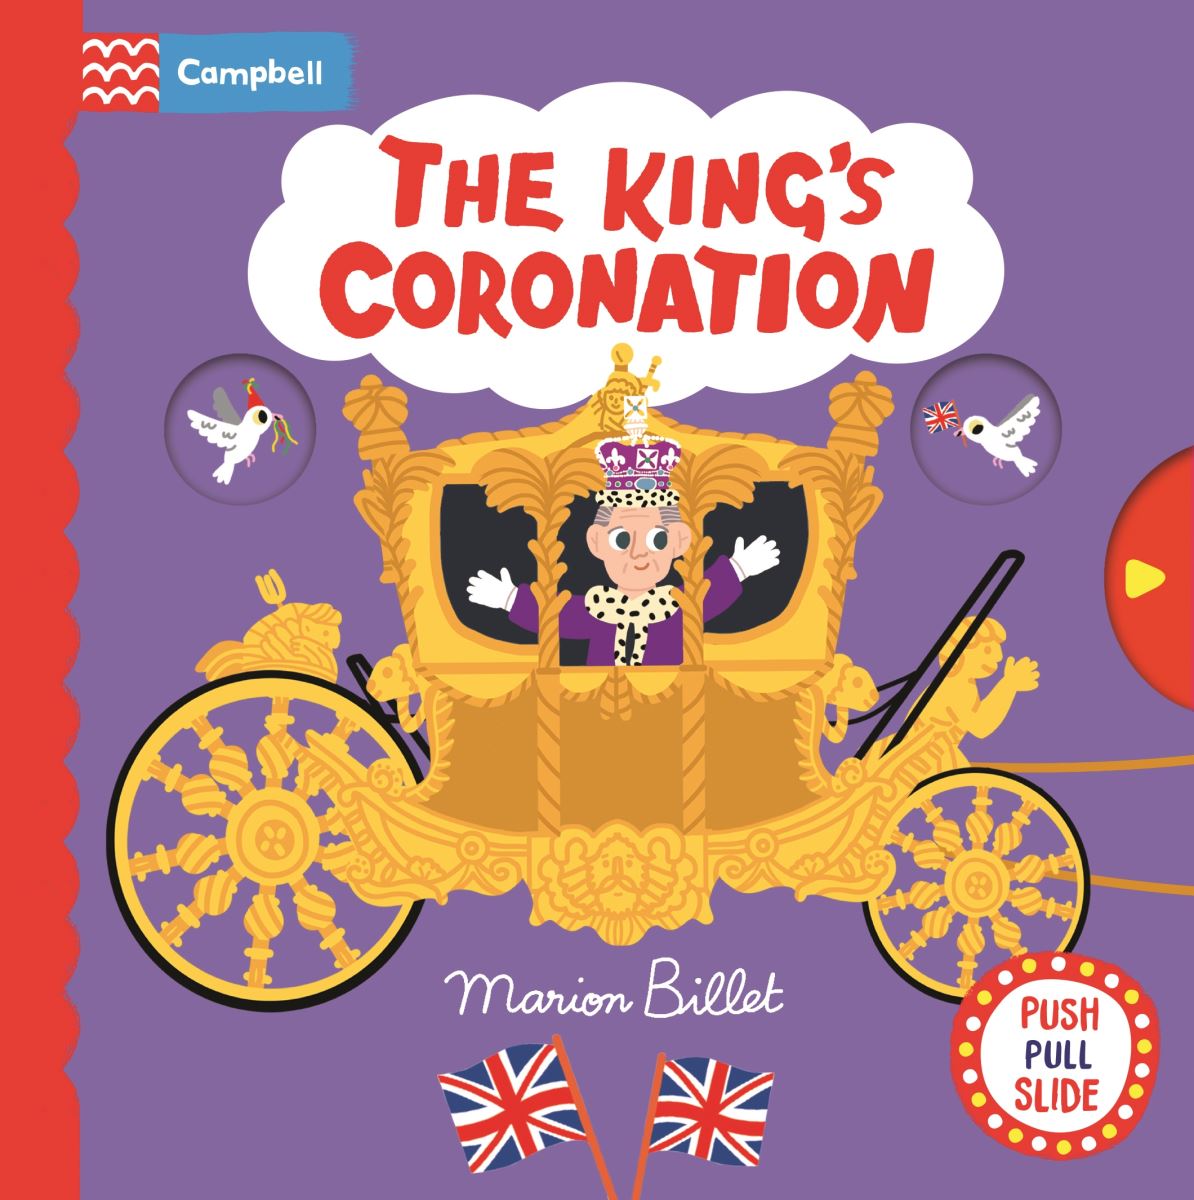 The King’s Coronation by Marion Billet